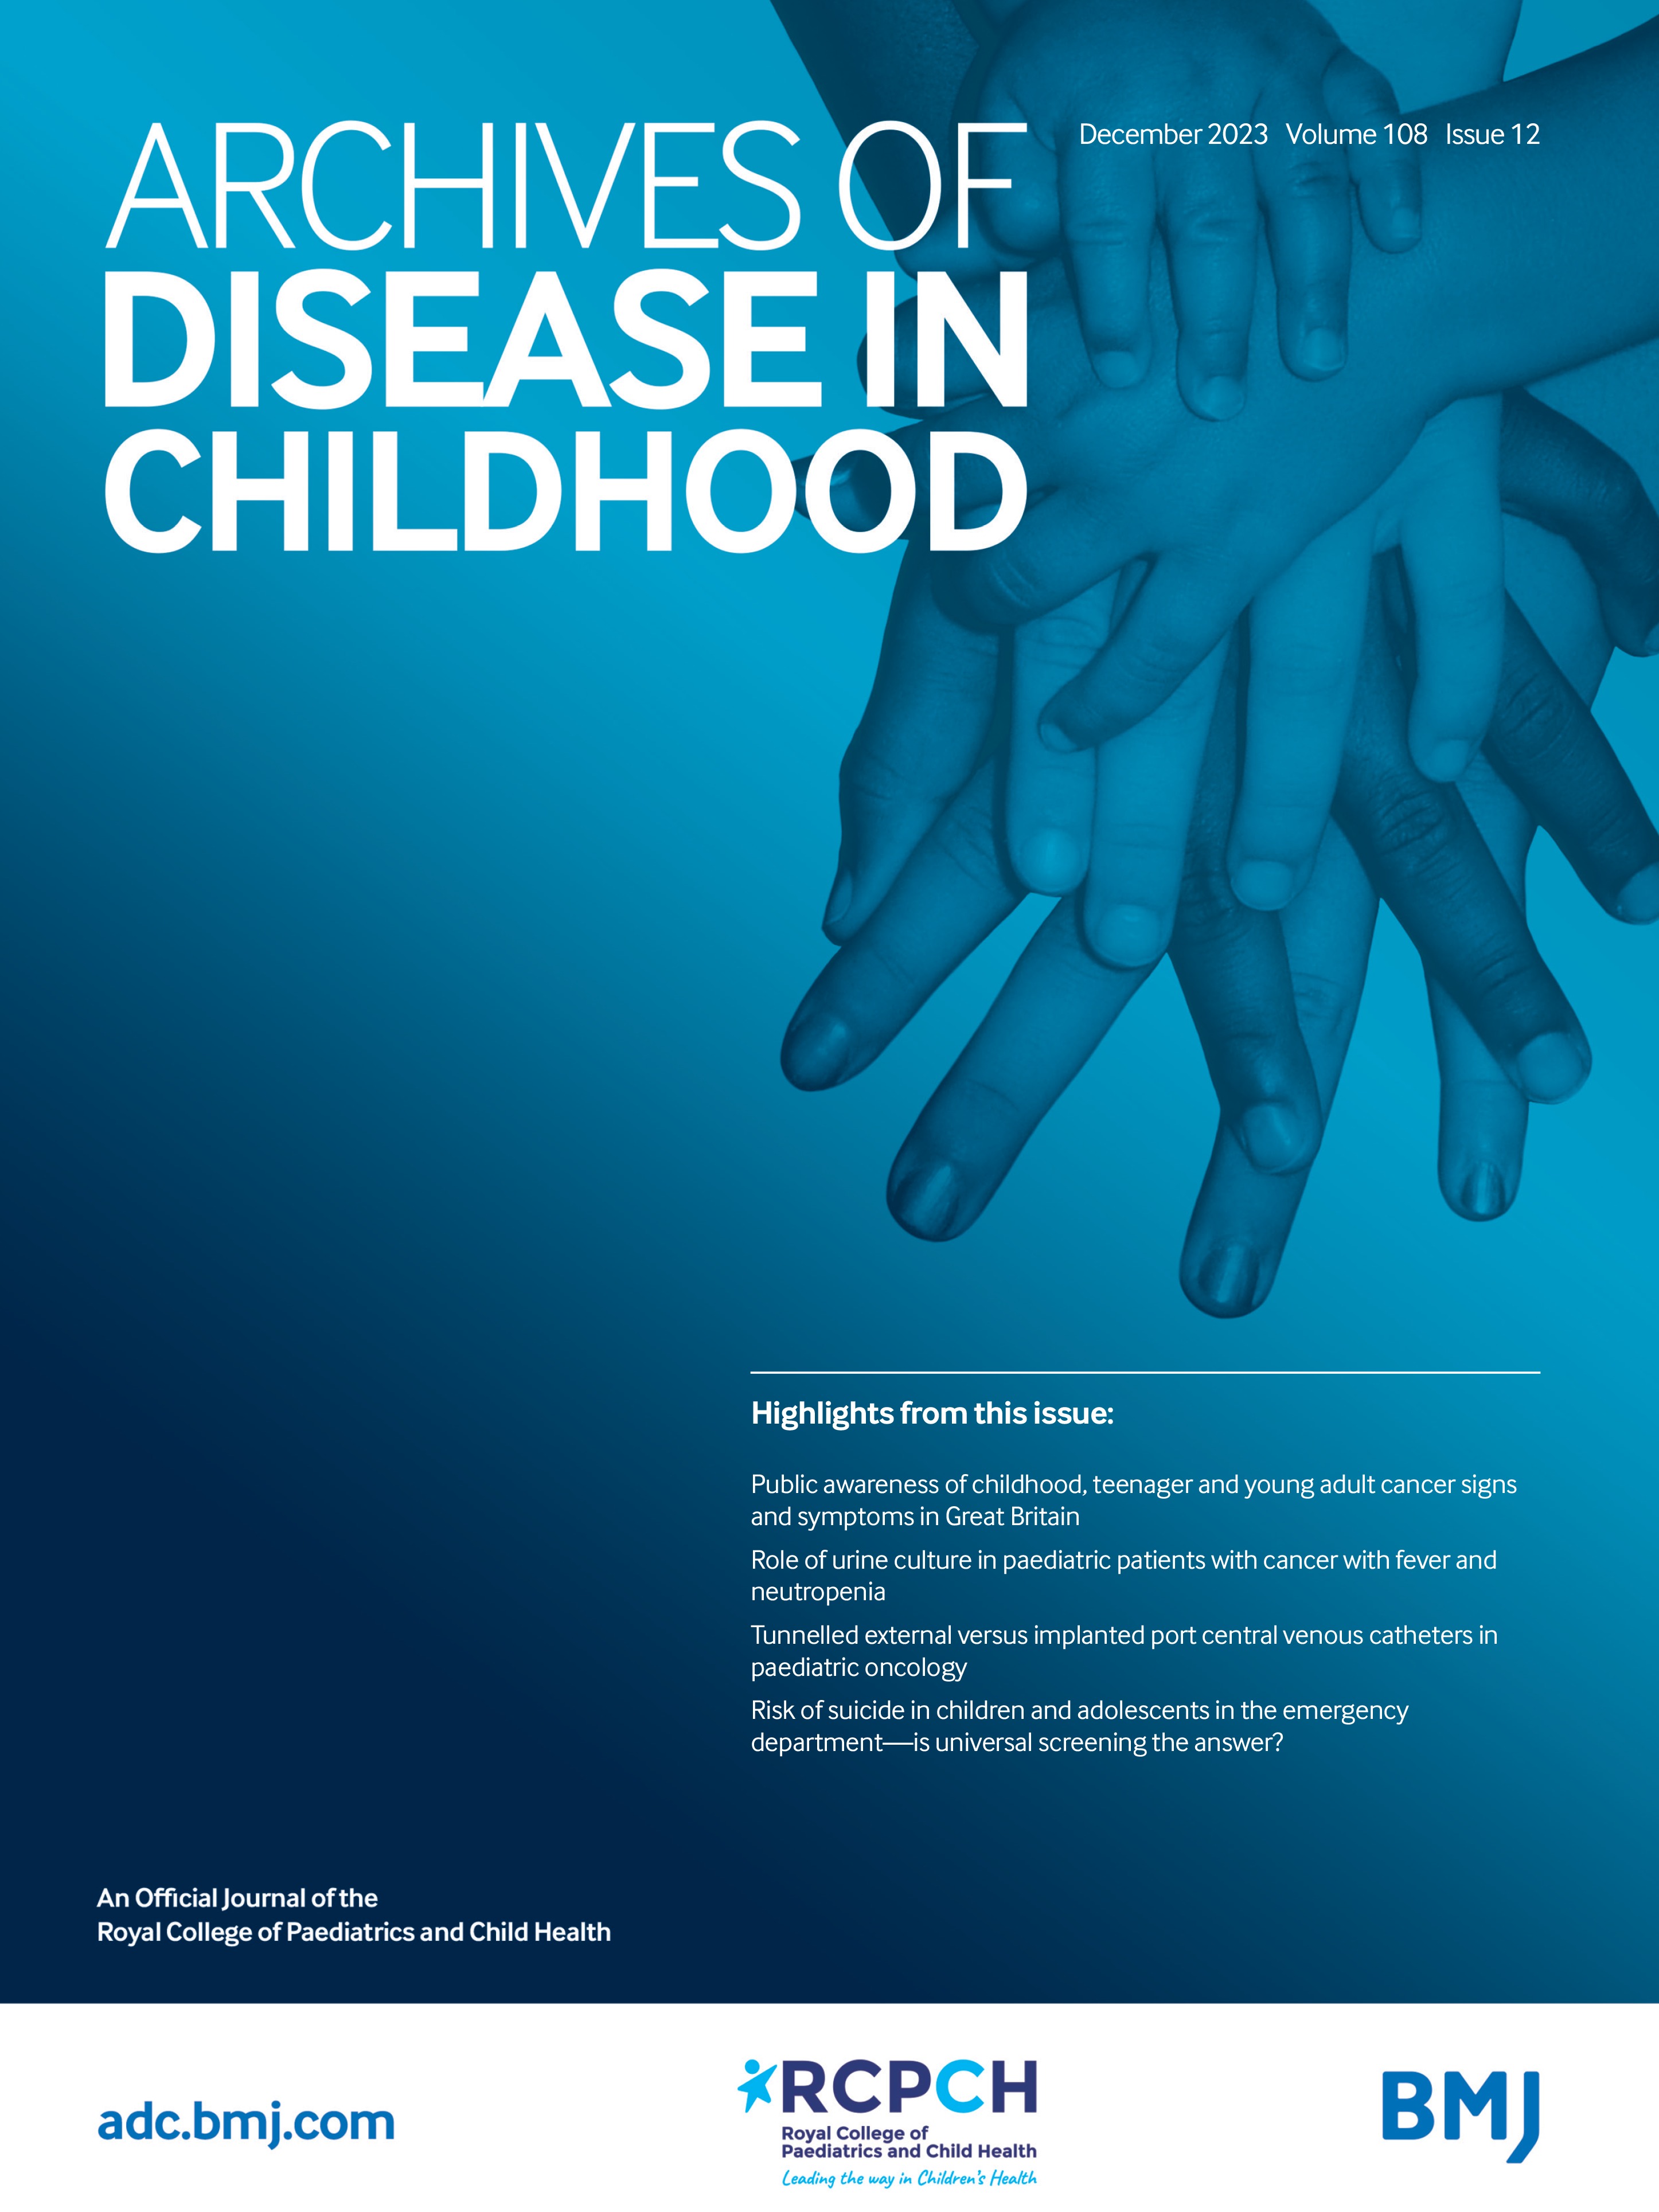 Role of urine culture in paediatric patients with cancer with fever and neutropenia: a prospective observational study